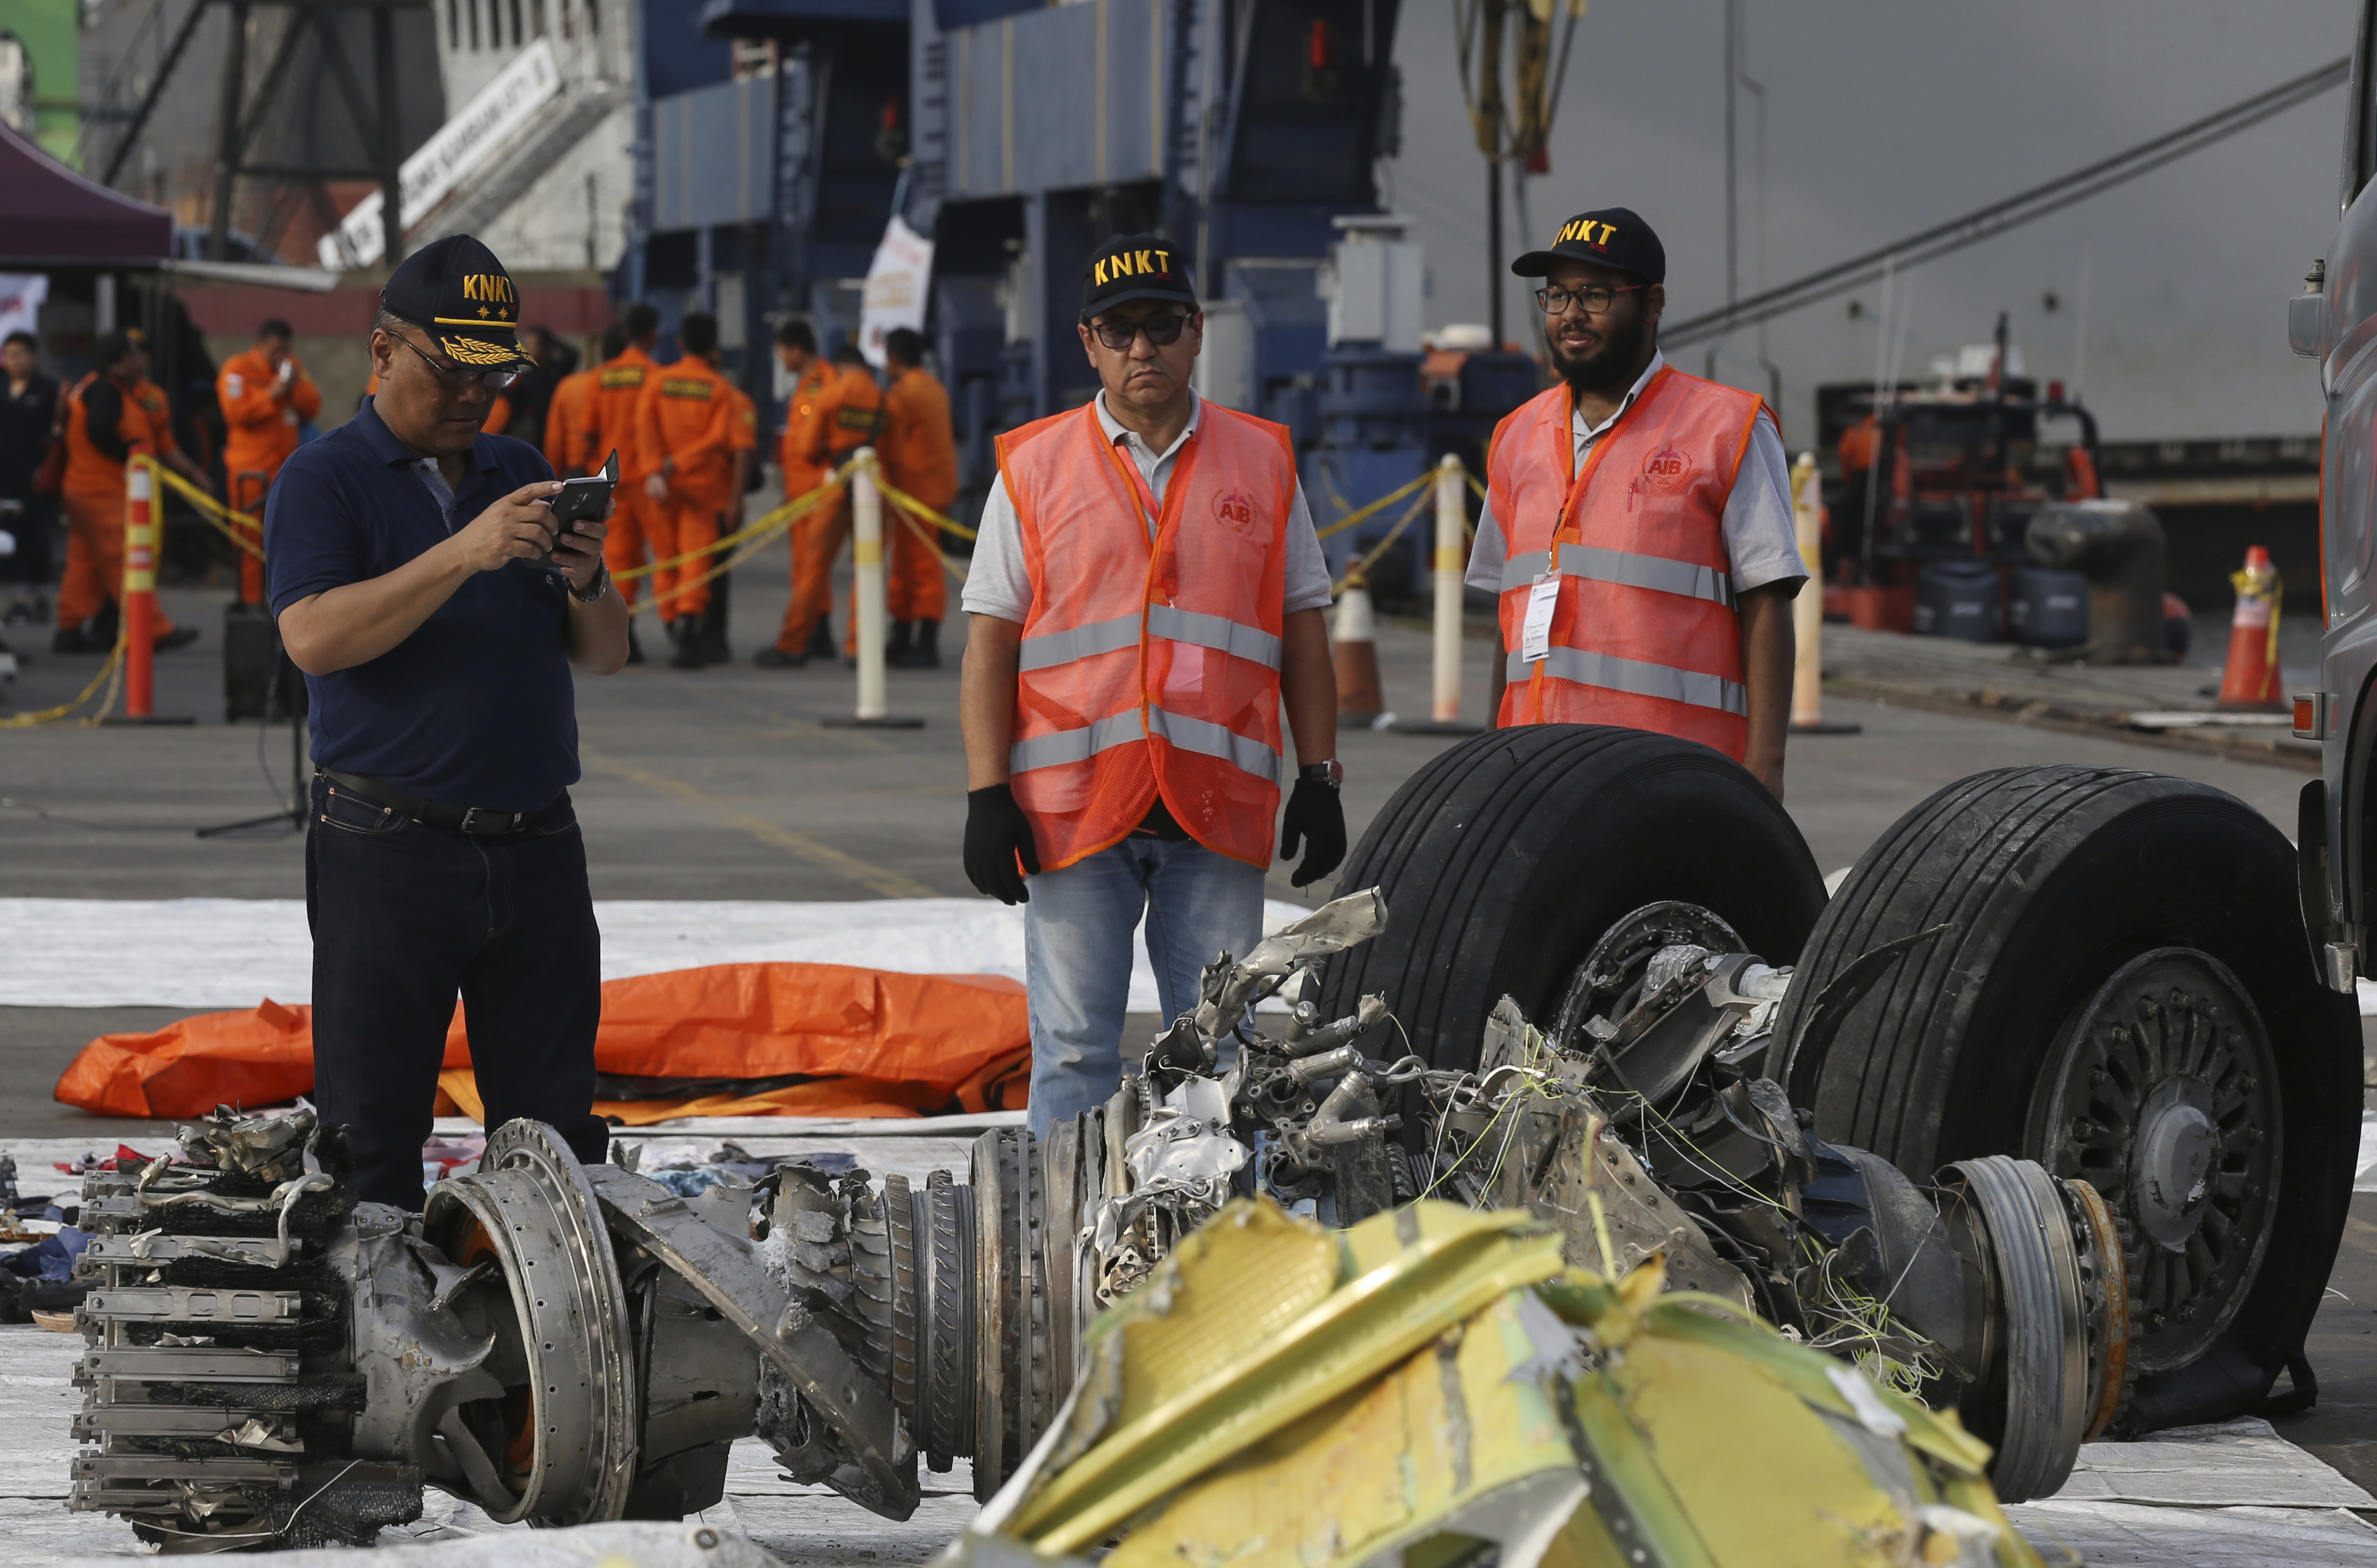 FILE - Officials inspect an engine recovered from the crashed Lion Air jet in Jakarta, Indonesia, Nov. 4, 2018. The brand new Boeing 737 MAX 8 jet plunged into the Java Sea just minutes after takeoff from Jakarta early on Oct. 29, killing all of its passengers on board. On Sunday, July 7, 2024, the Justice Department said Boeing has agreed to plead guilty to a criminal fraud charge stemming from two deadly crashes of 737 Max jetliners. (AP Photo/Achmad Ibrahim, File)